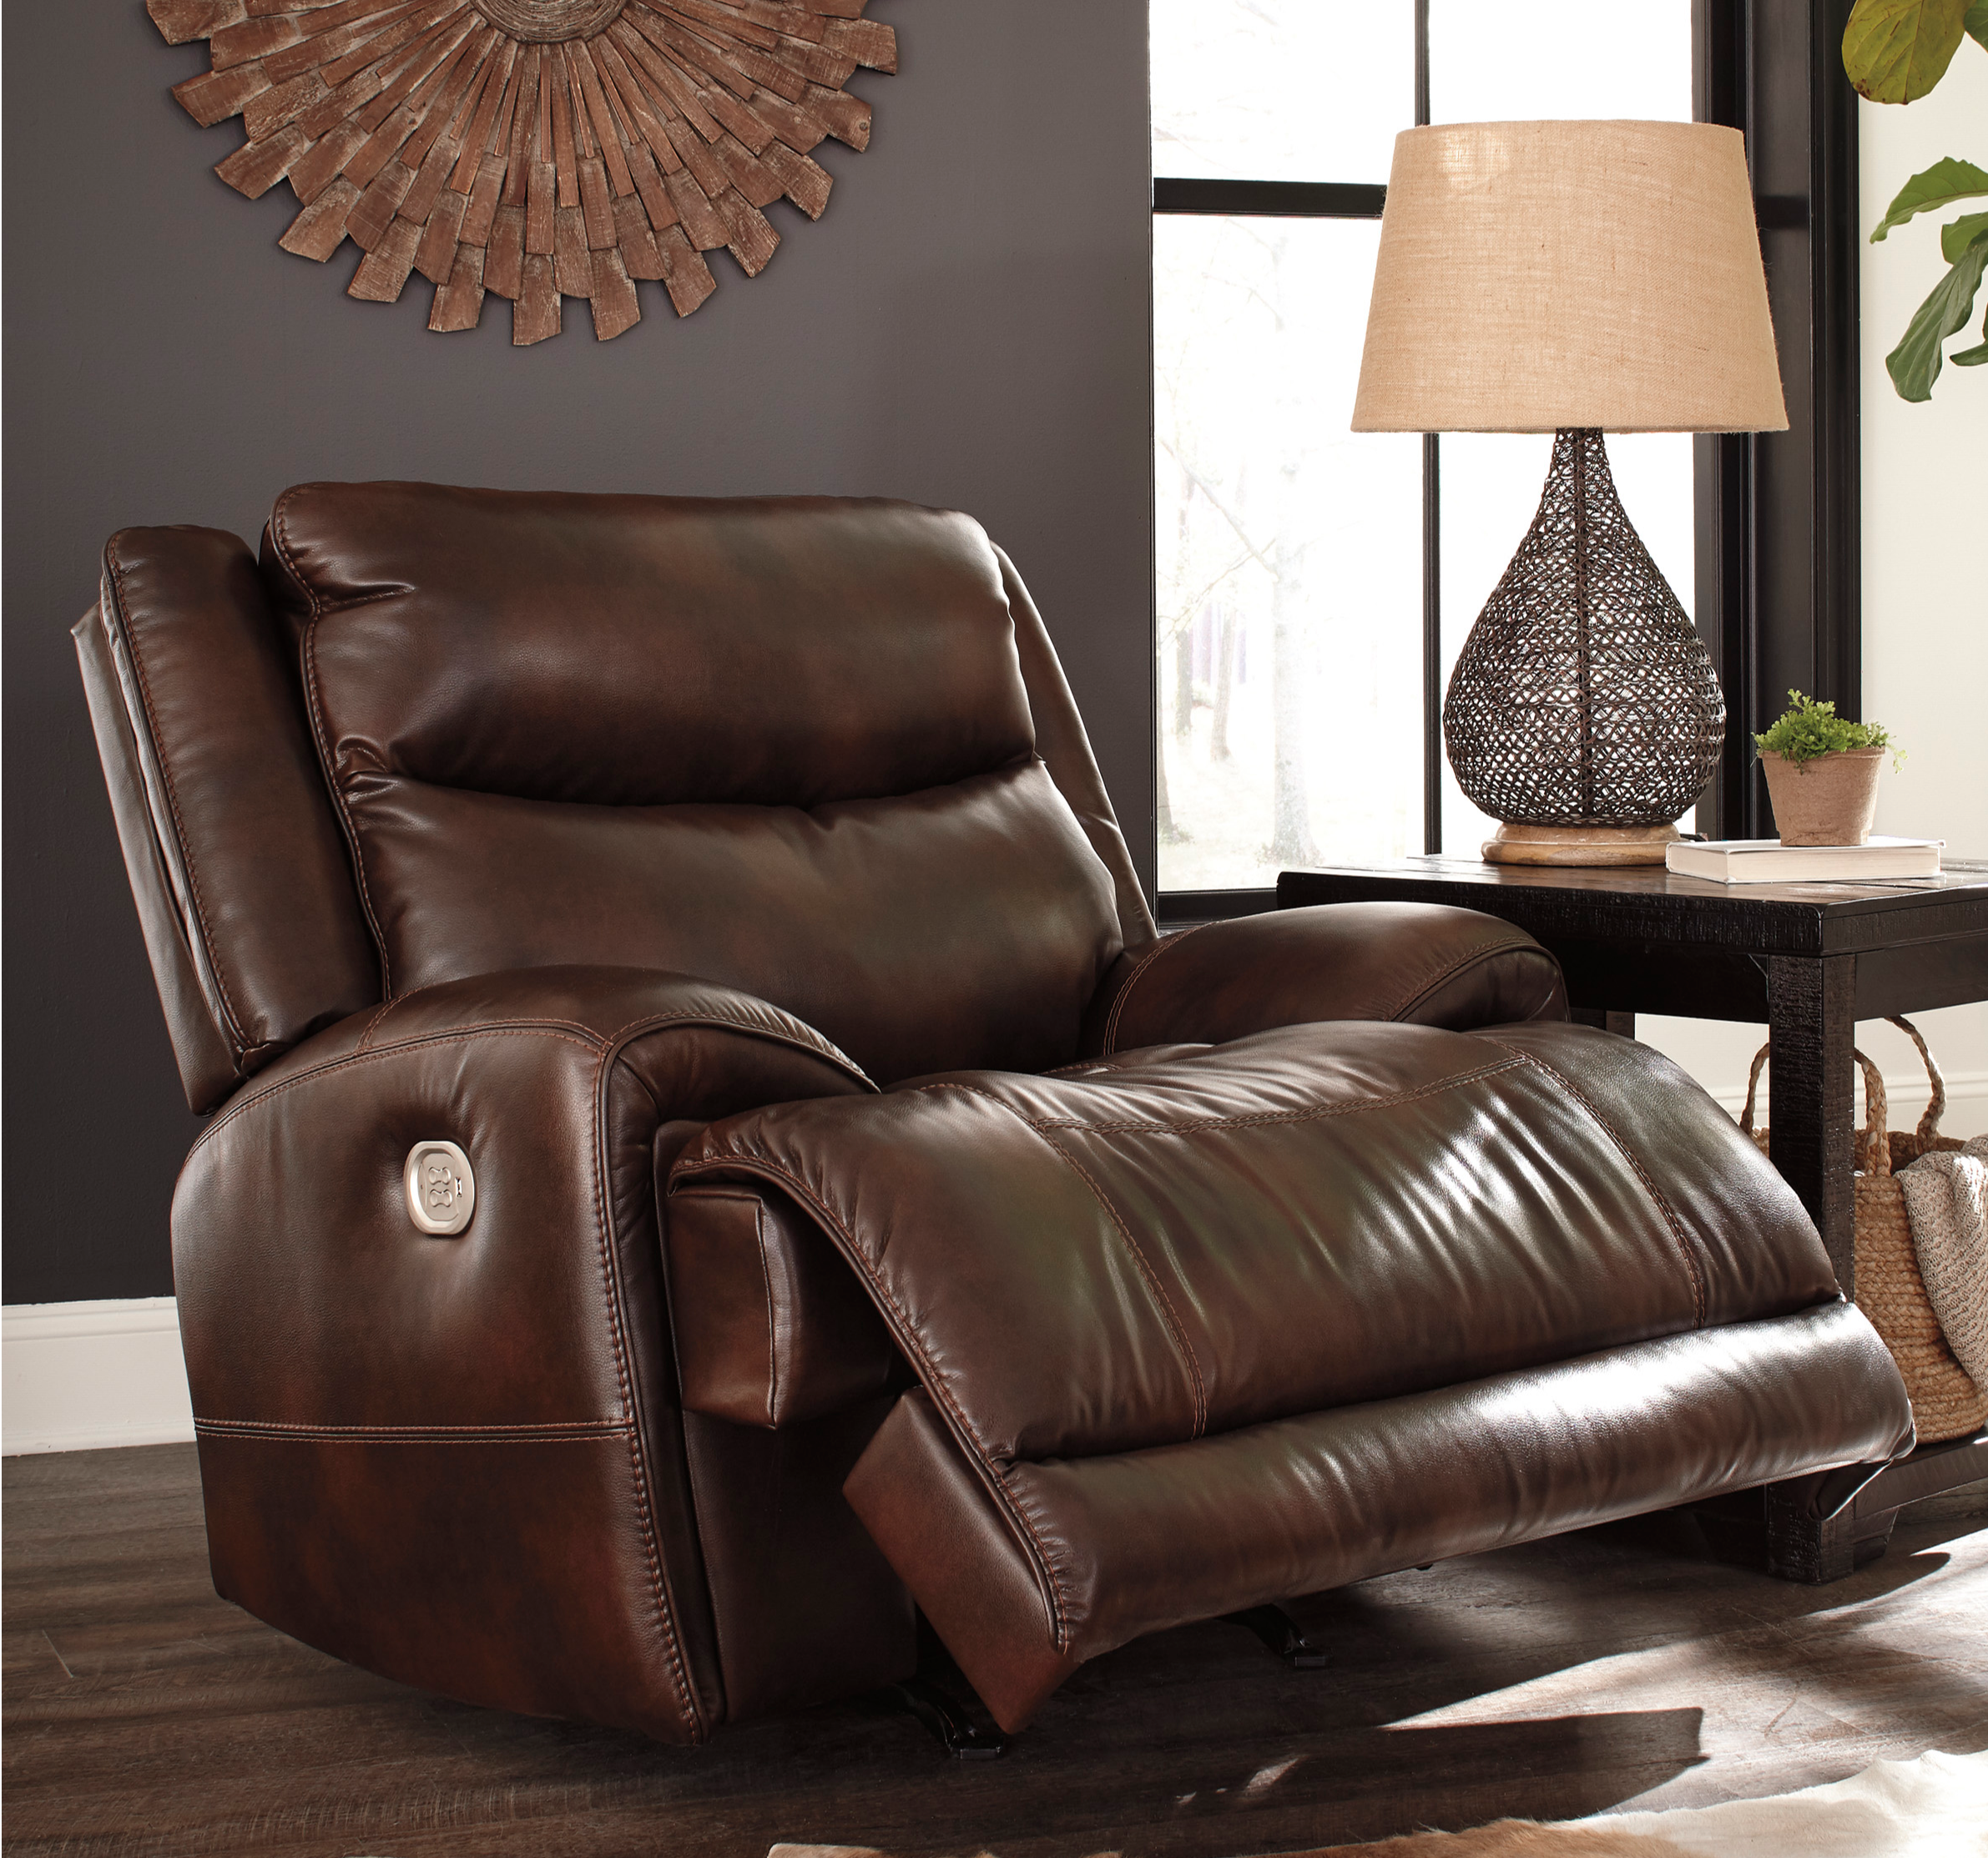 Recliner Couch Benefits for Health and Social Life